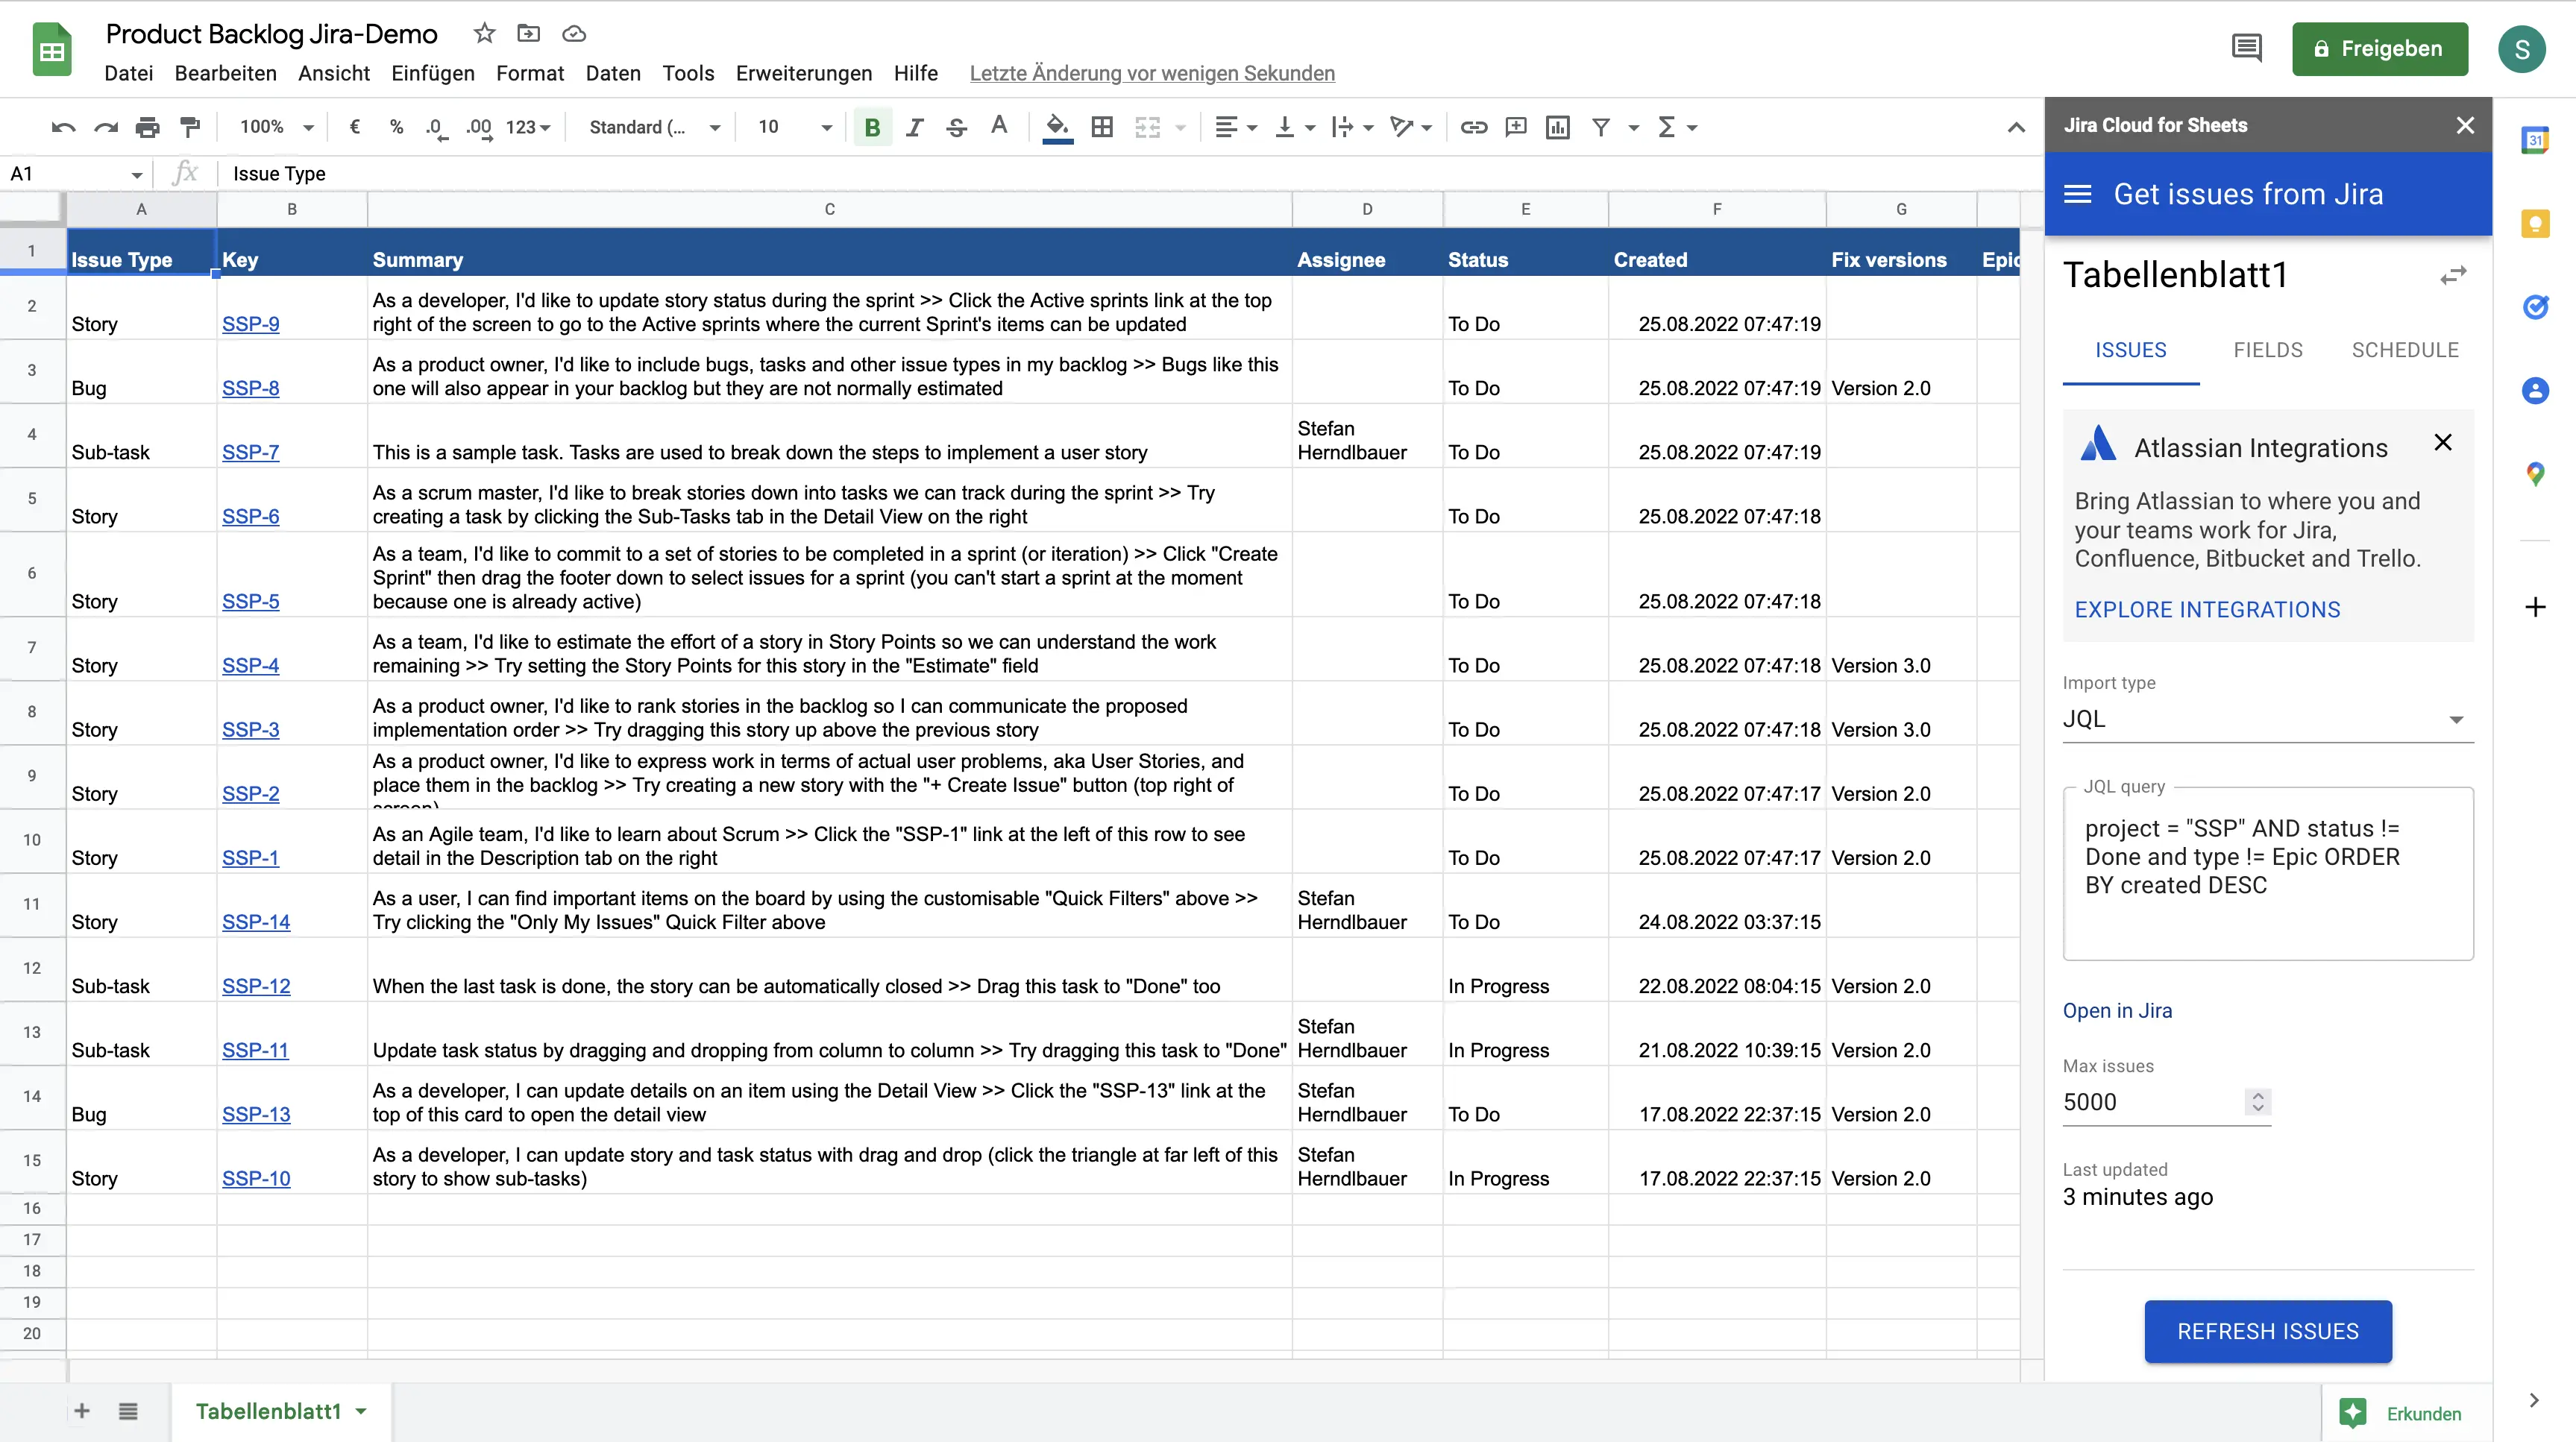 Google sheets with the fetched data from Jira